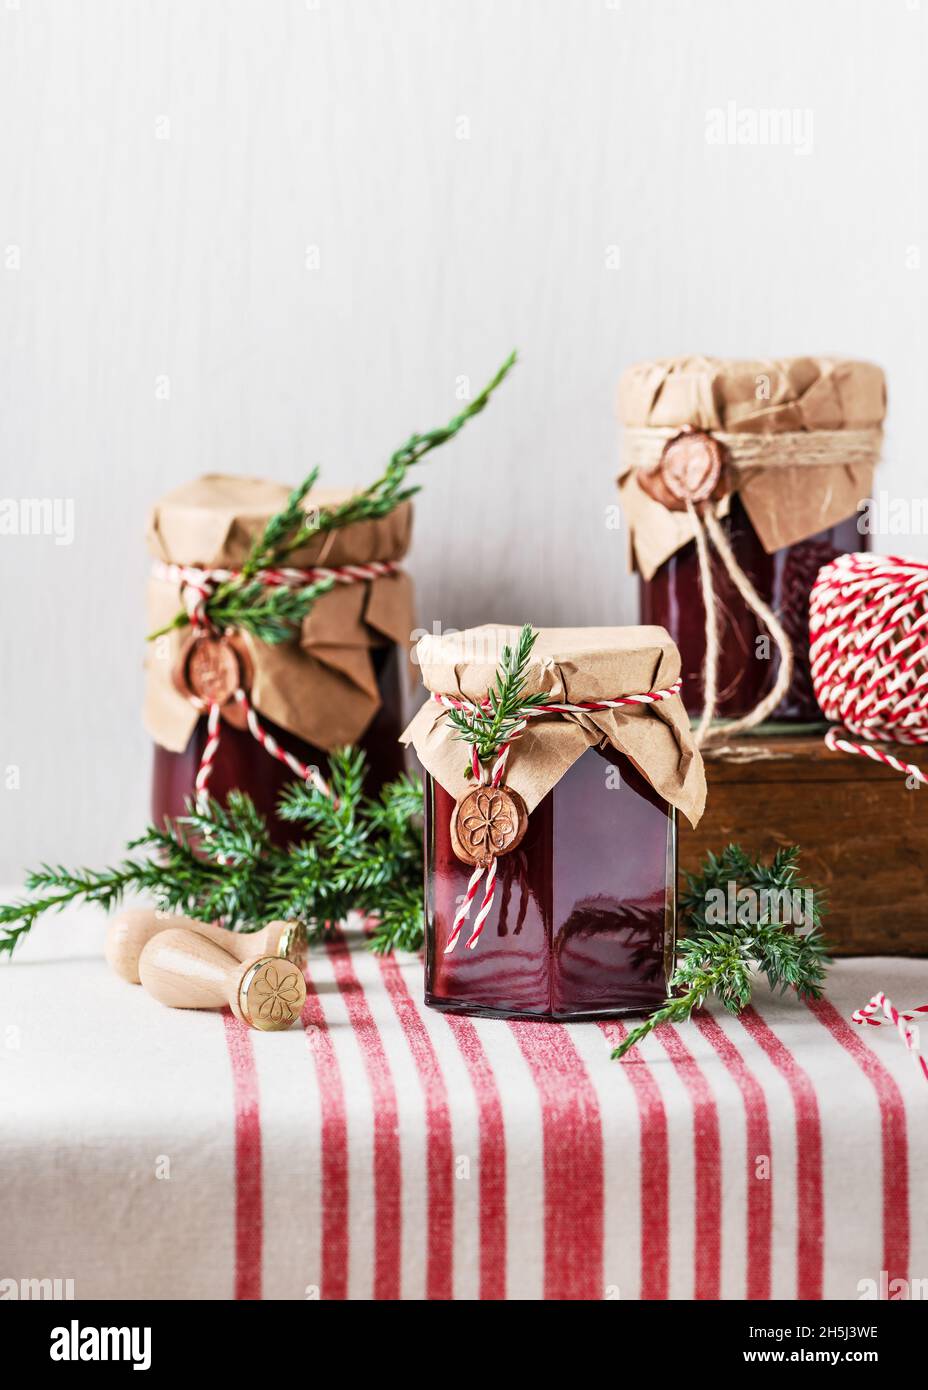 Handmade gift for Christmas. Homemade fruit jam in the jars decorated with grunge paper, wax seal and green twig of coniferous tree. Stock Photo